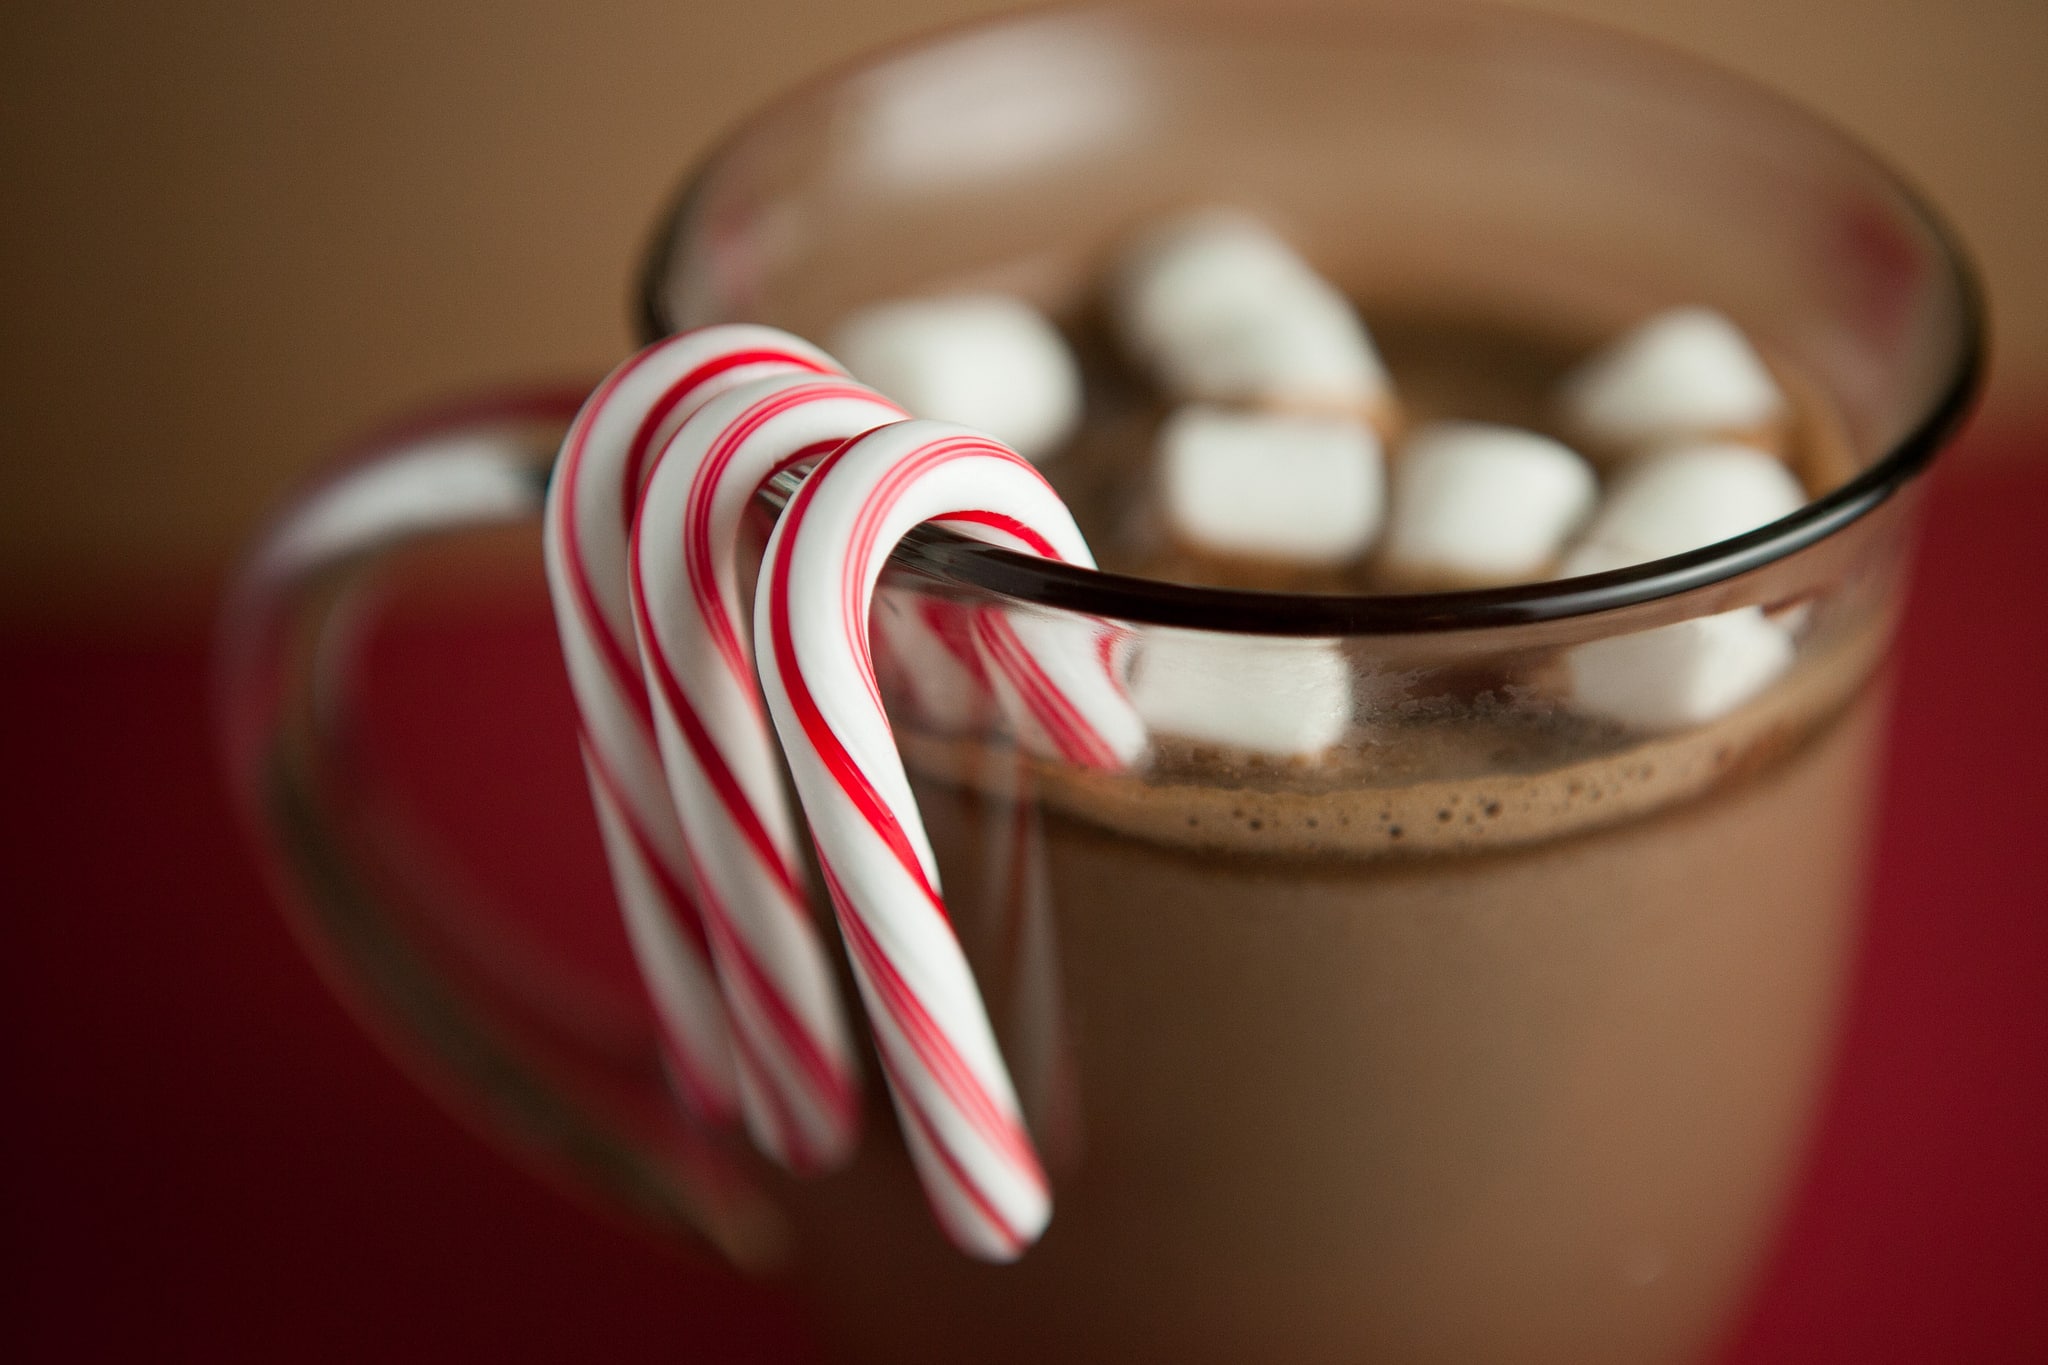 Creamy Peppermint Hot Chocolate recipe for 2! This recipe uses milk, peppermint mocha, chocolate chips, cocoa powder and more!